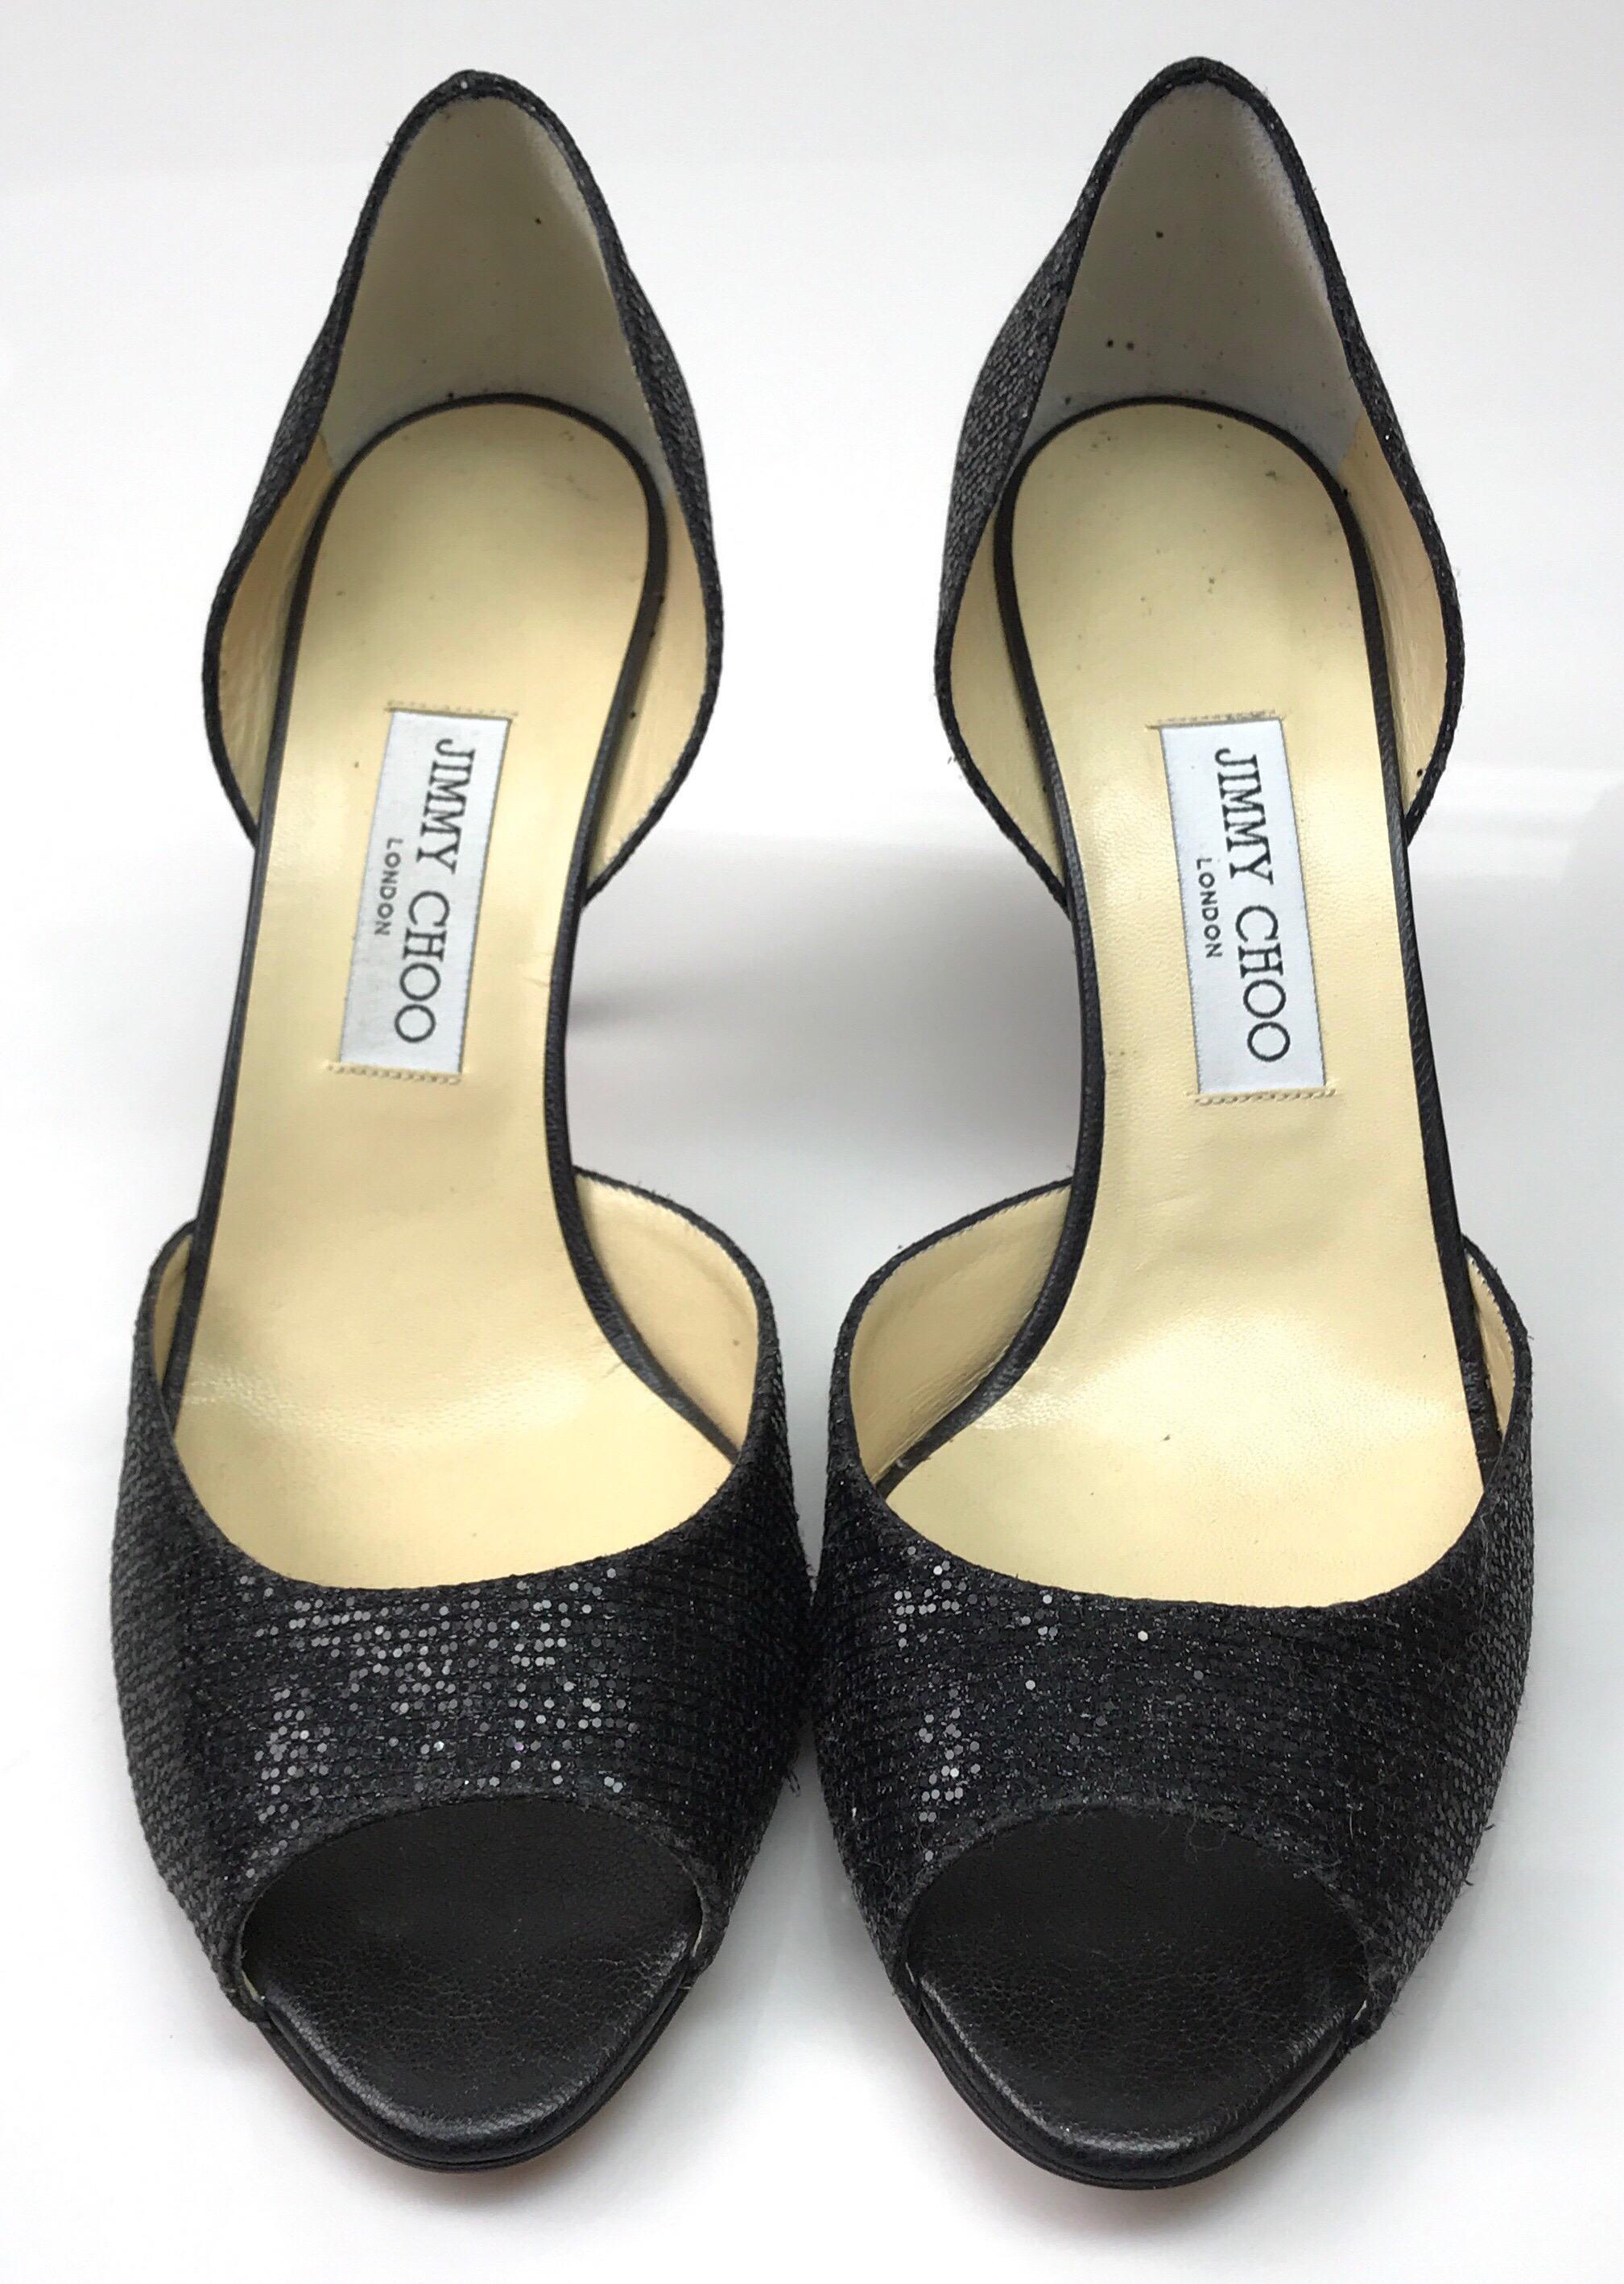 Jimmy Choo Black Peep Toe Sparkle Heels - 42. These elegant Jimmy Choo heels are in good condition. There is use consistent with wear, as shown in pictures. These peep toe heels are made of black sparkles throughout. The heel has a black leather